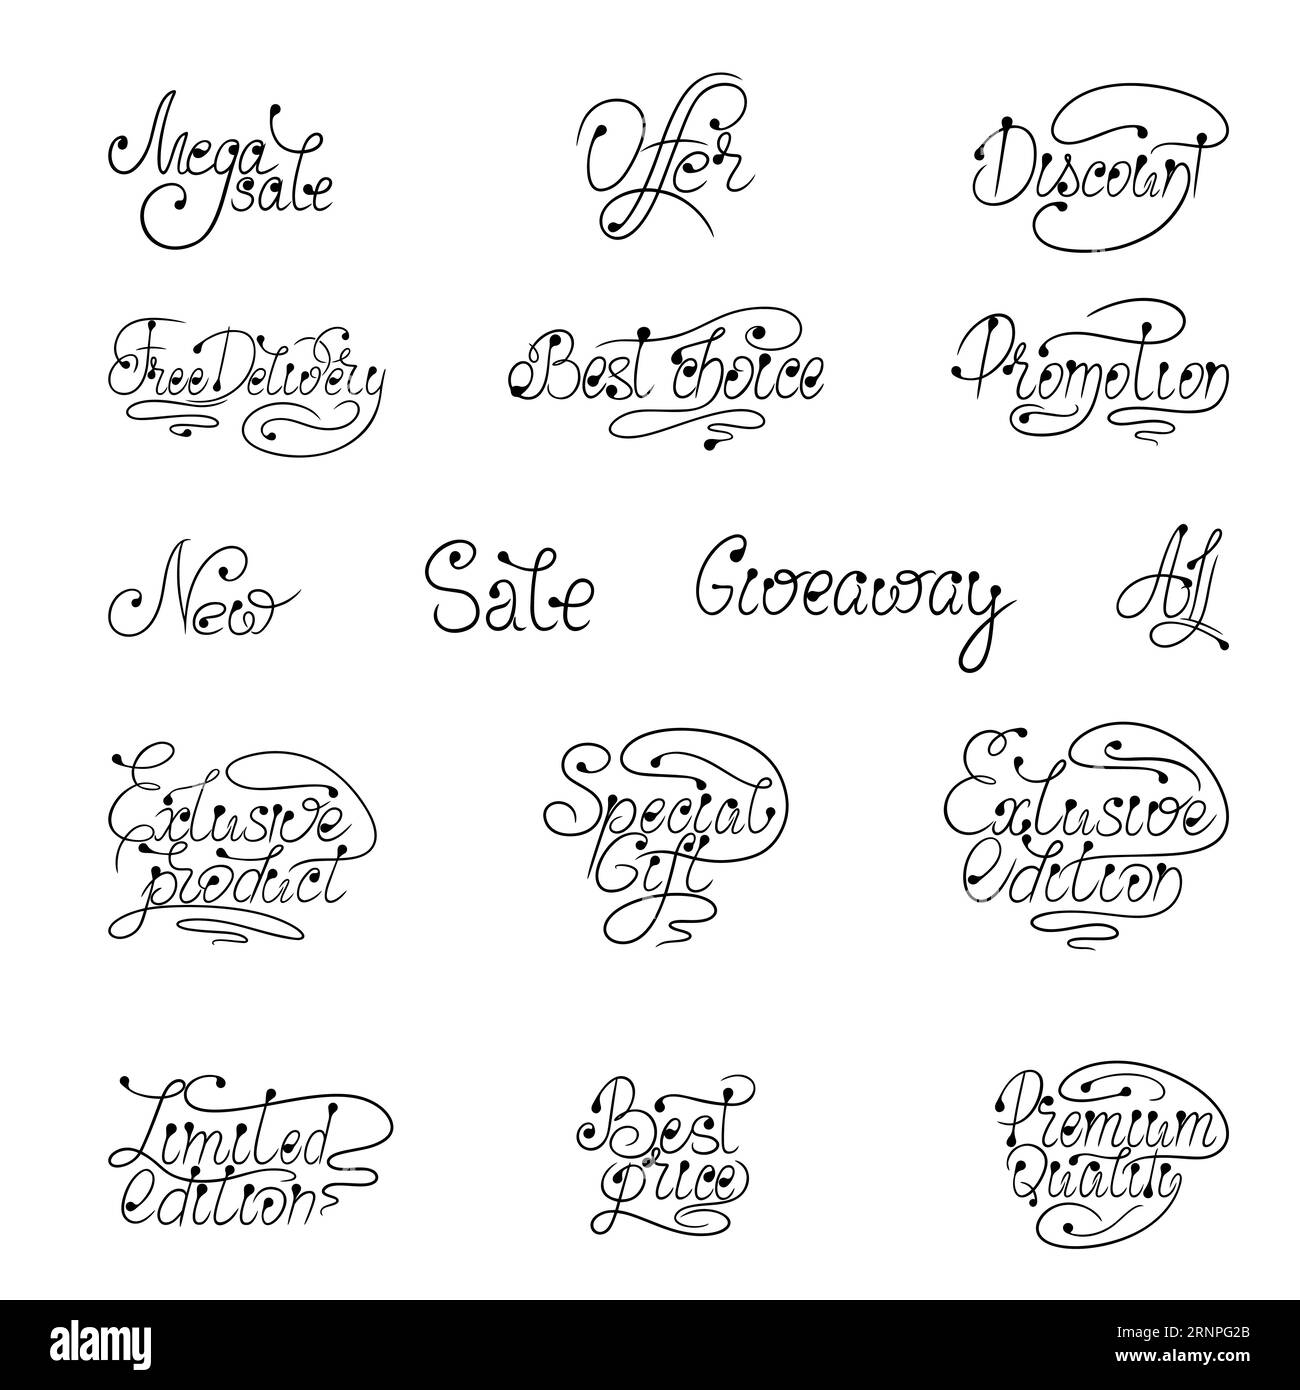 Vector illustration, calligraphic slogans for sale, discounts, promotions, giveaway. Lettering for poster, banner, flyer. Hand inspiration with drops Stock Vector